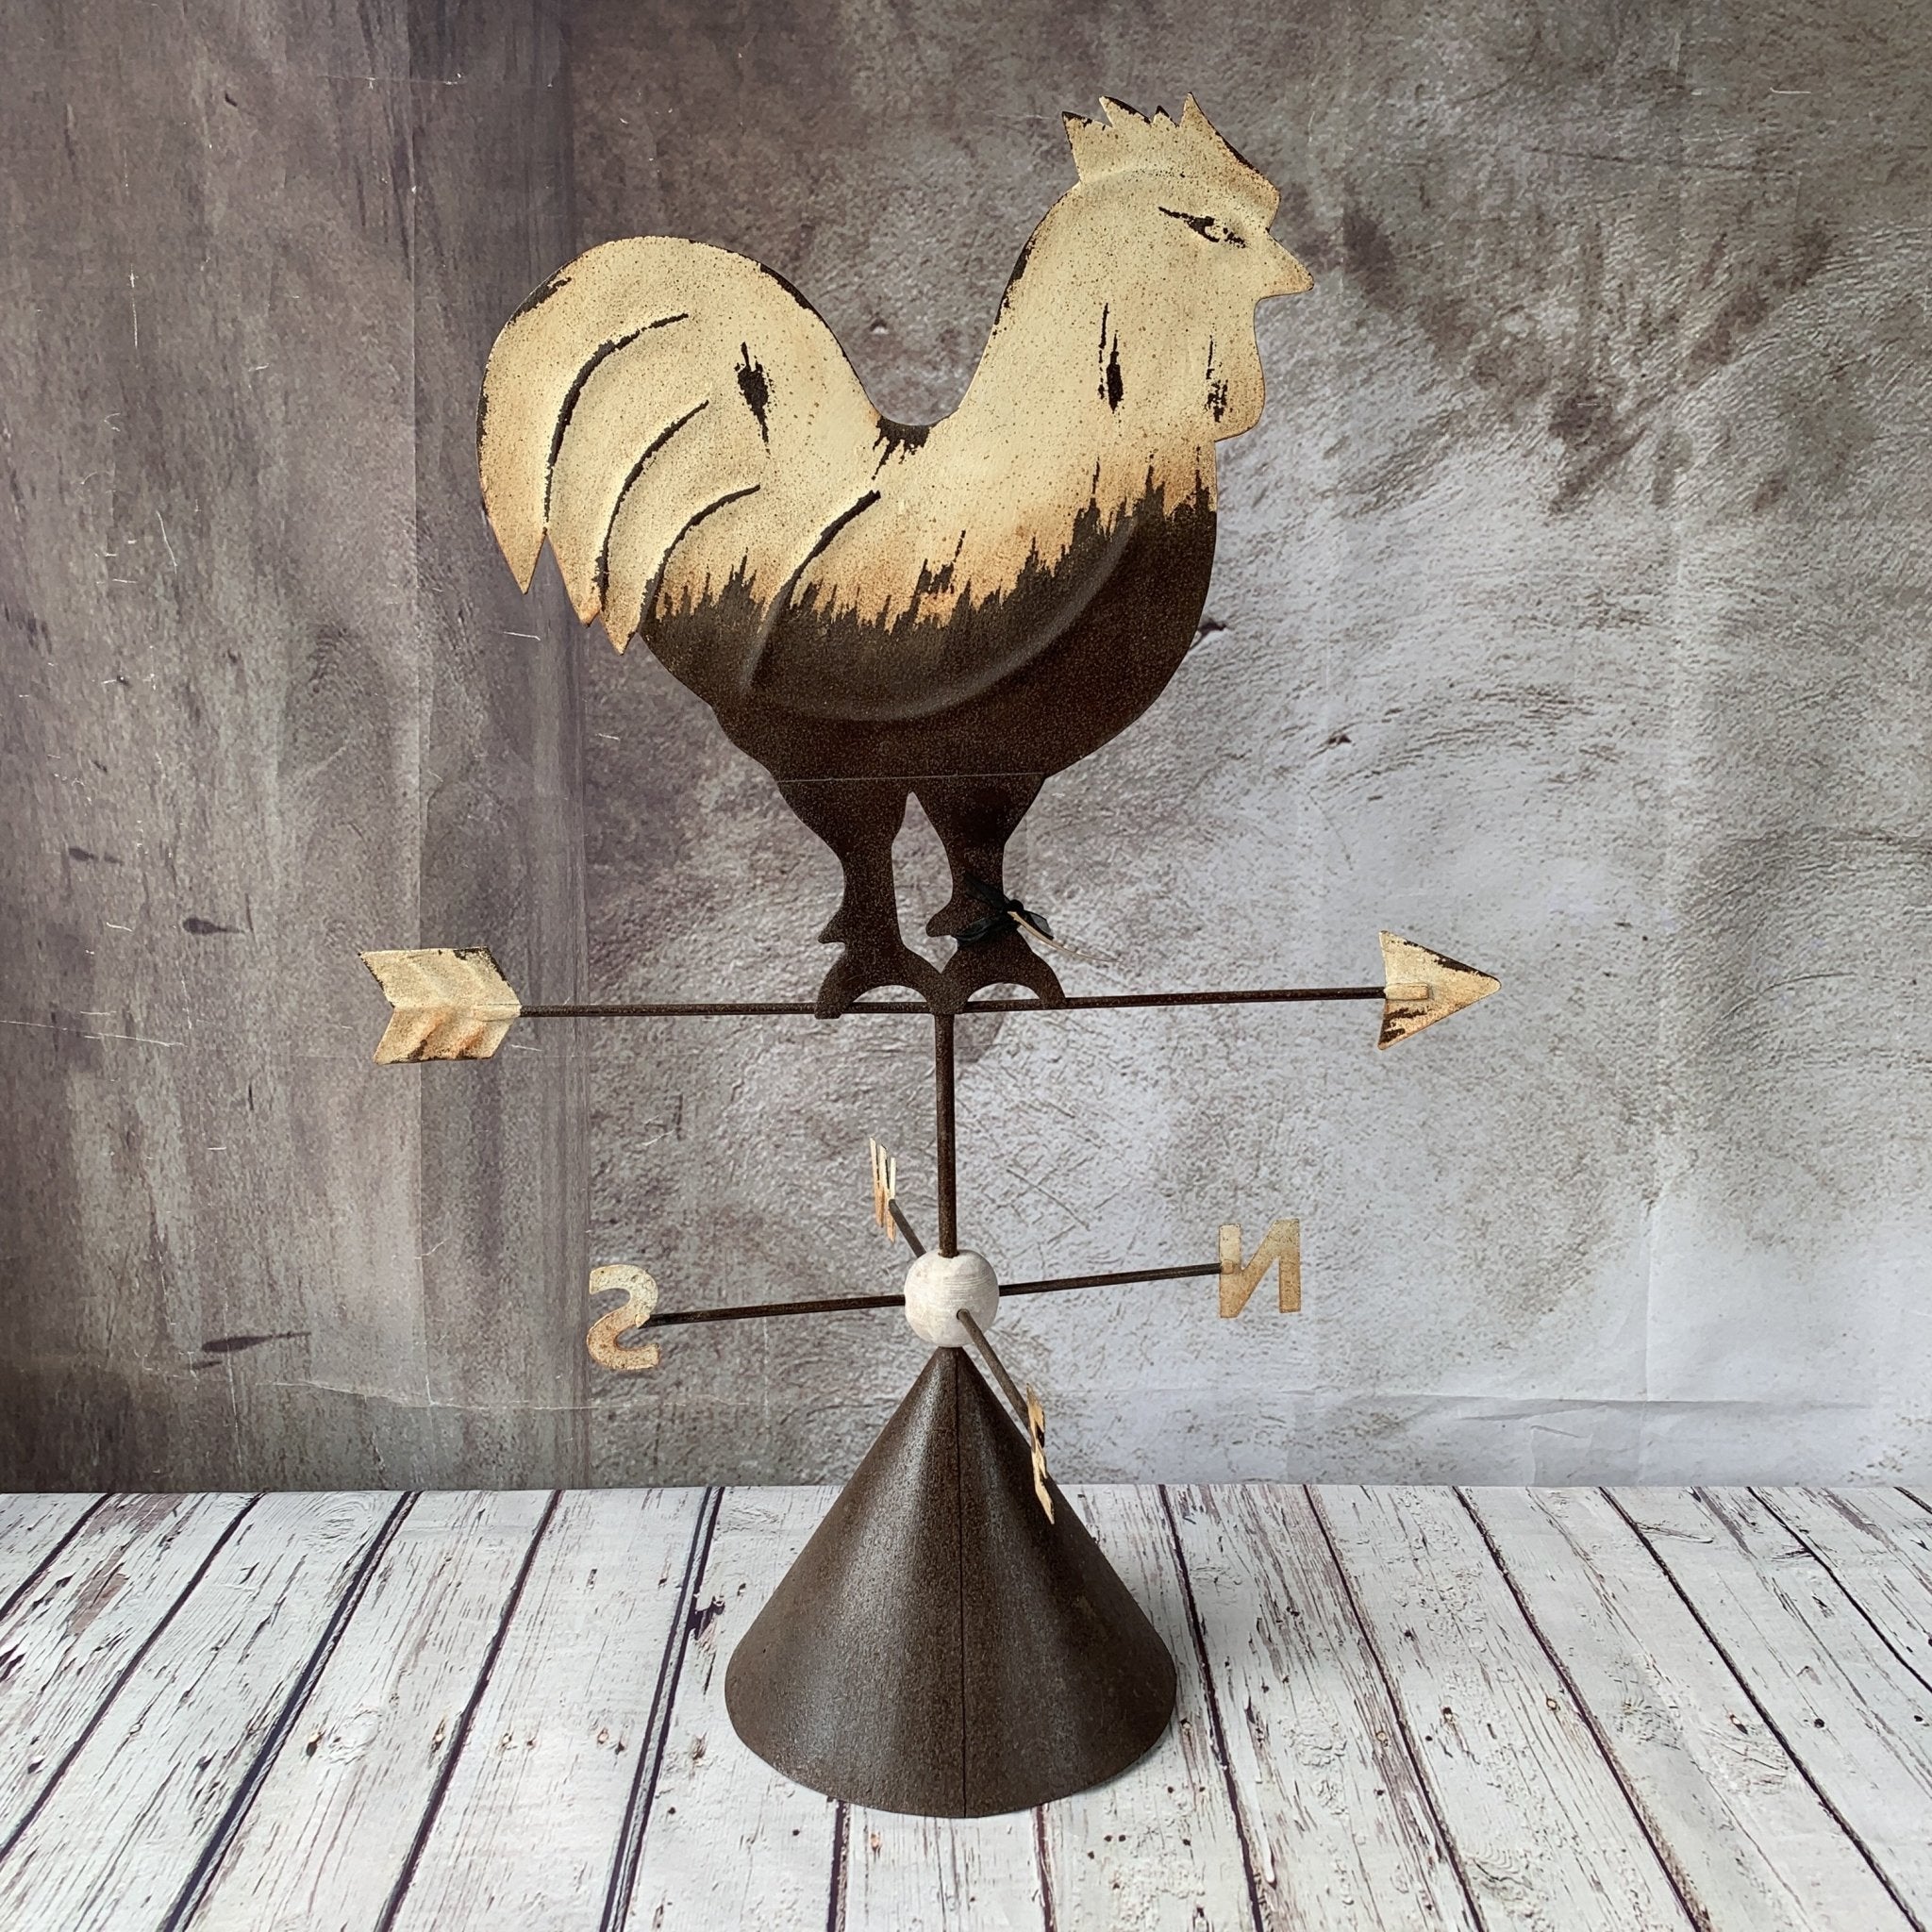 Metal Rooster Perched On Rustic Metal Directional Base